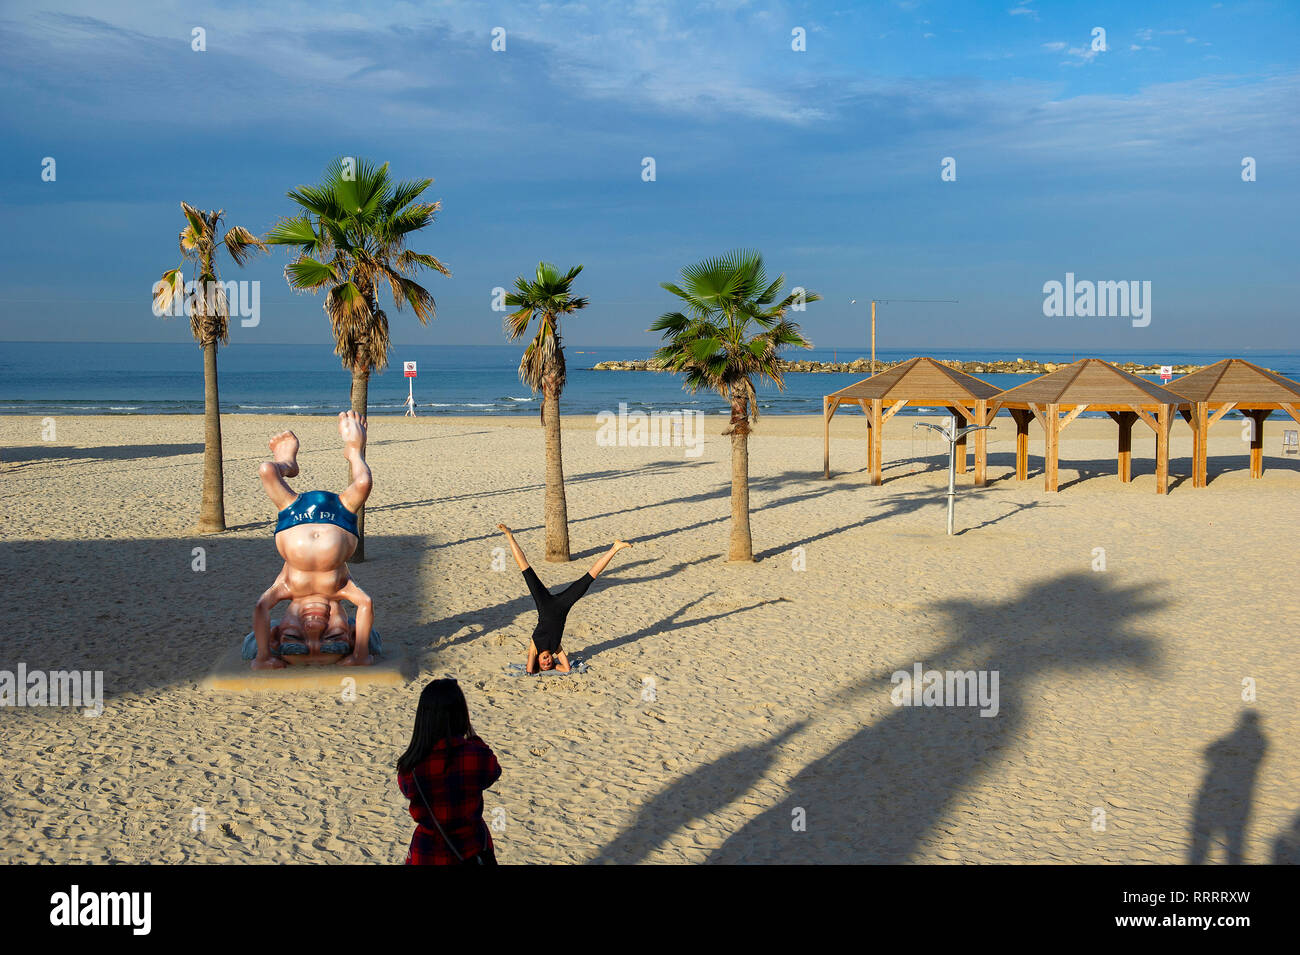 Young woman taking a picture of her friend doing yoga next to the Ben Gurion statue on the beach in Tel Aviv, Israel Stock Photo